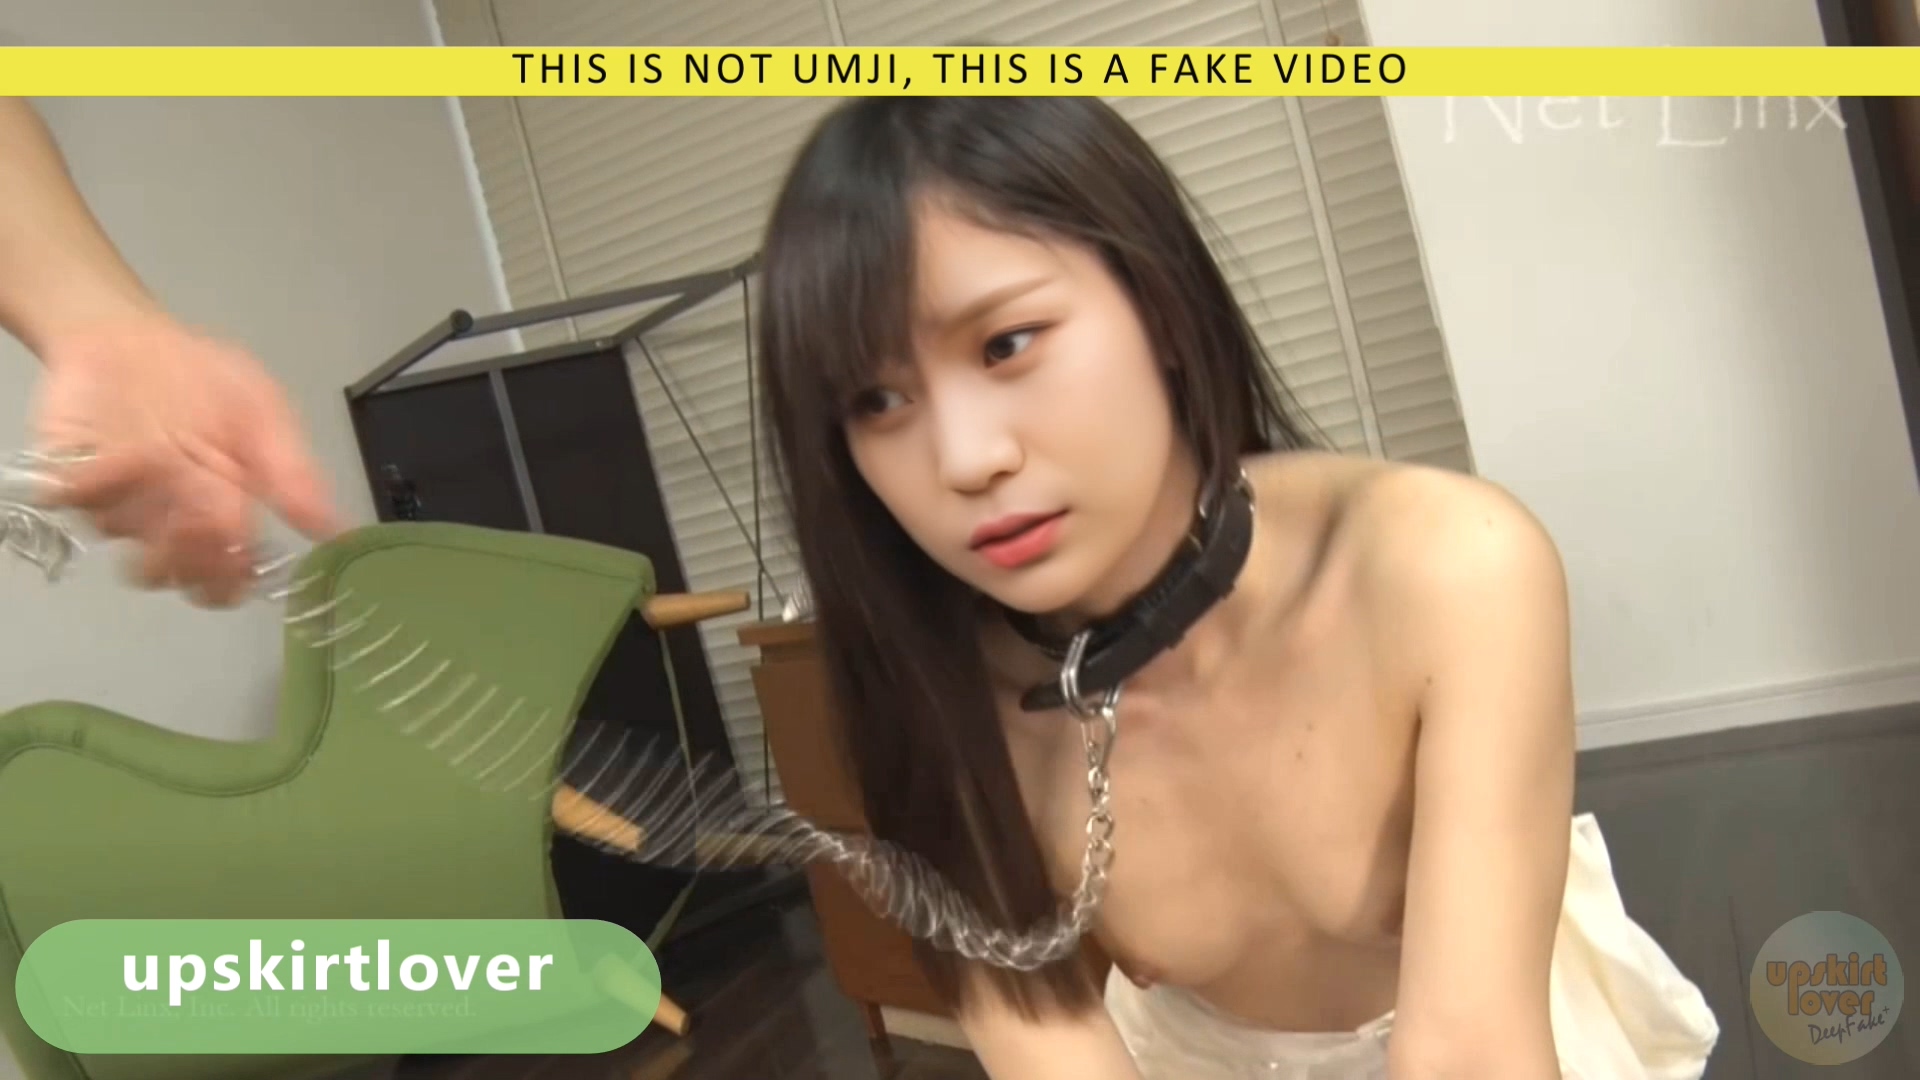 This is not UMJI (1) - TOKYO HOT n0954 preview (full video: 17:02)